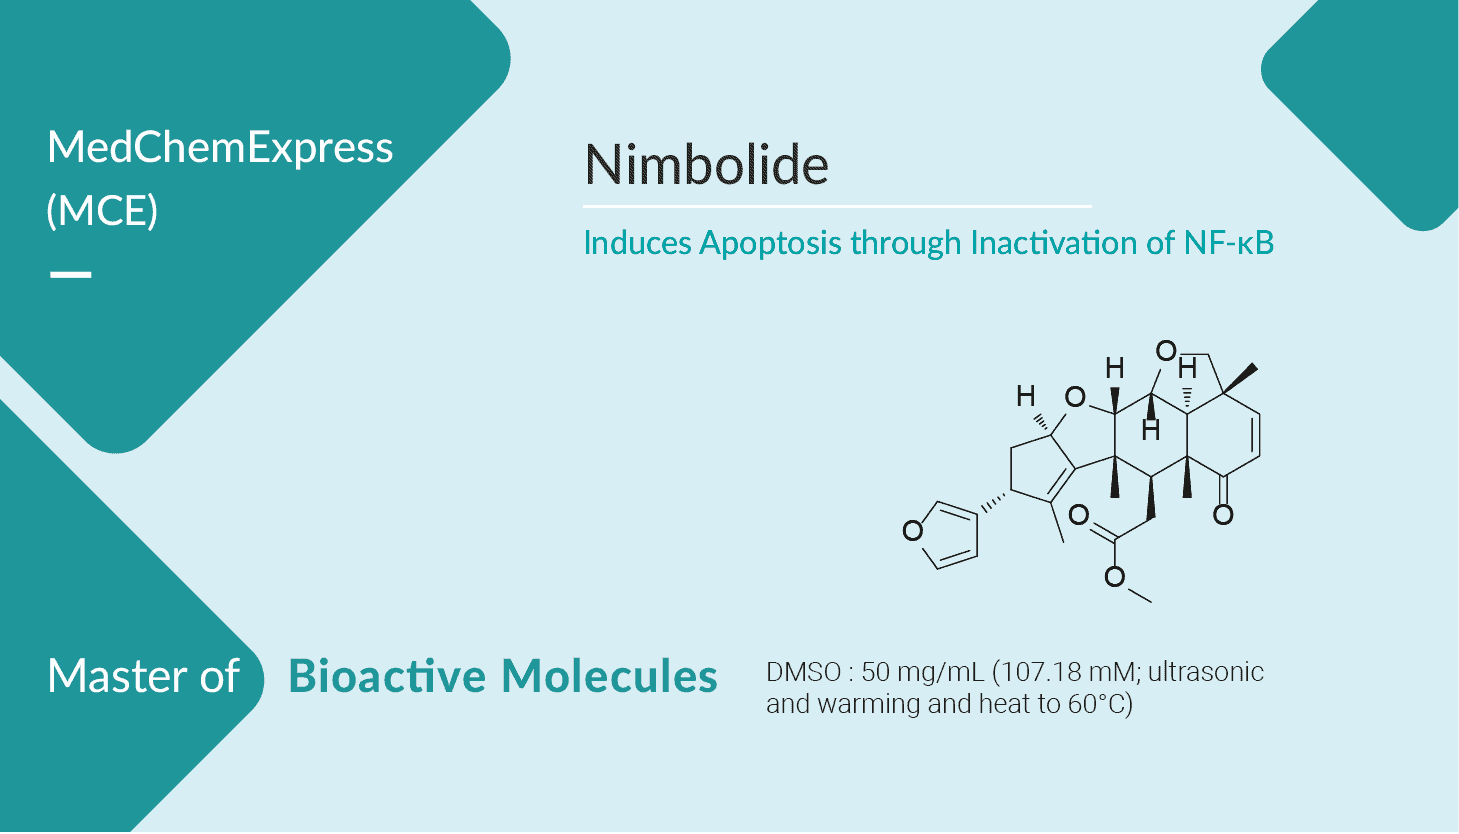 Nimbolide Induces Apoptosis through Inactivation of NF-κB